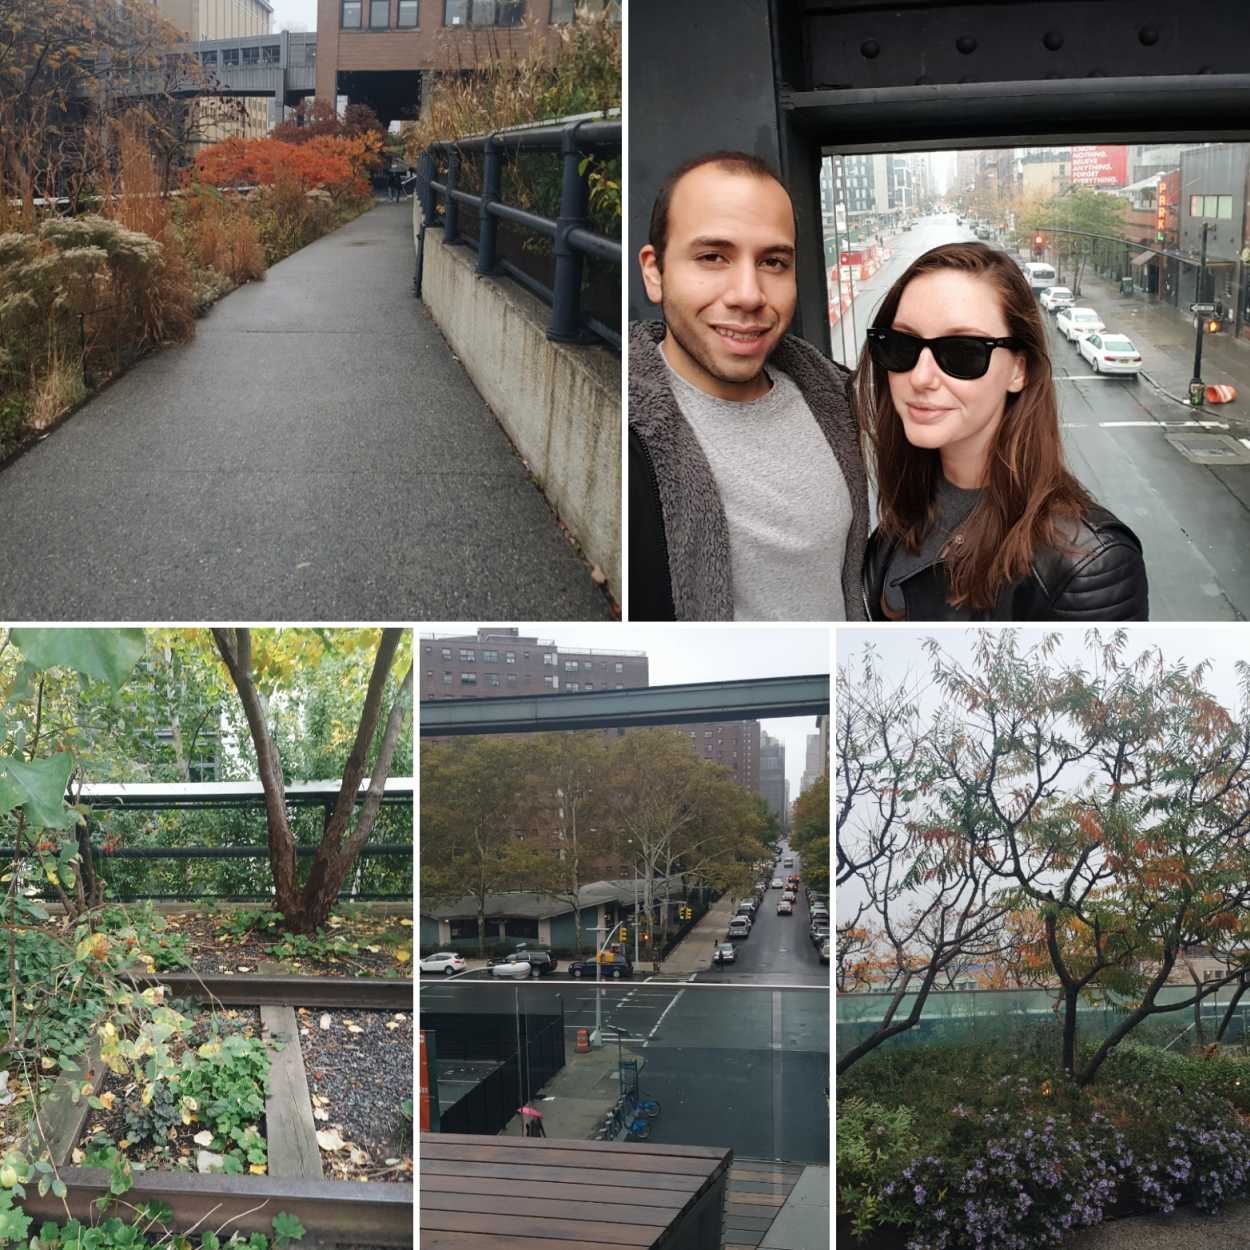 Collage of images taken on the High Line